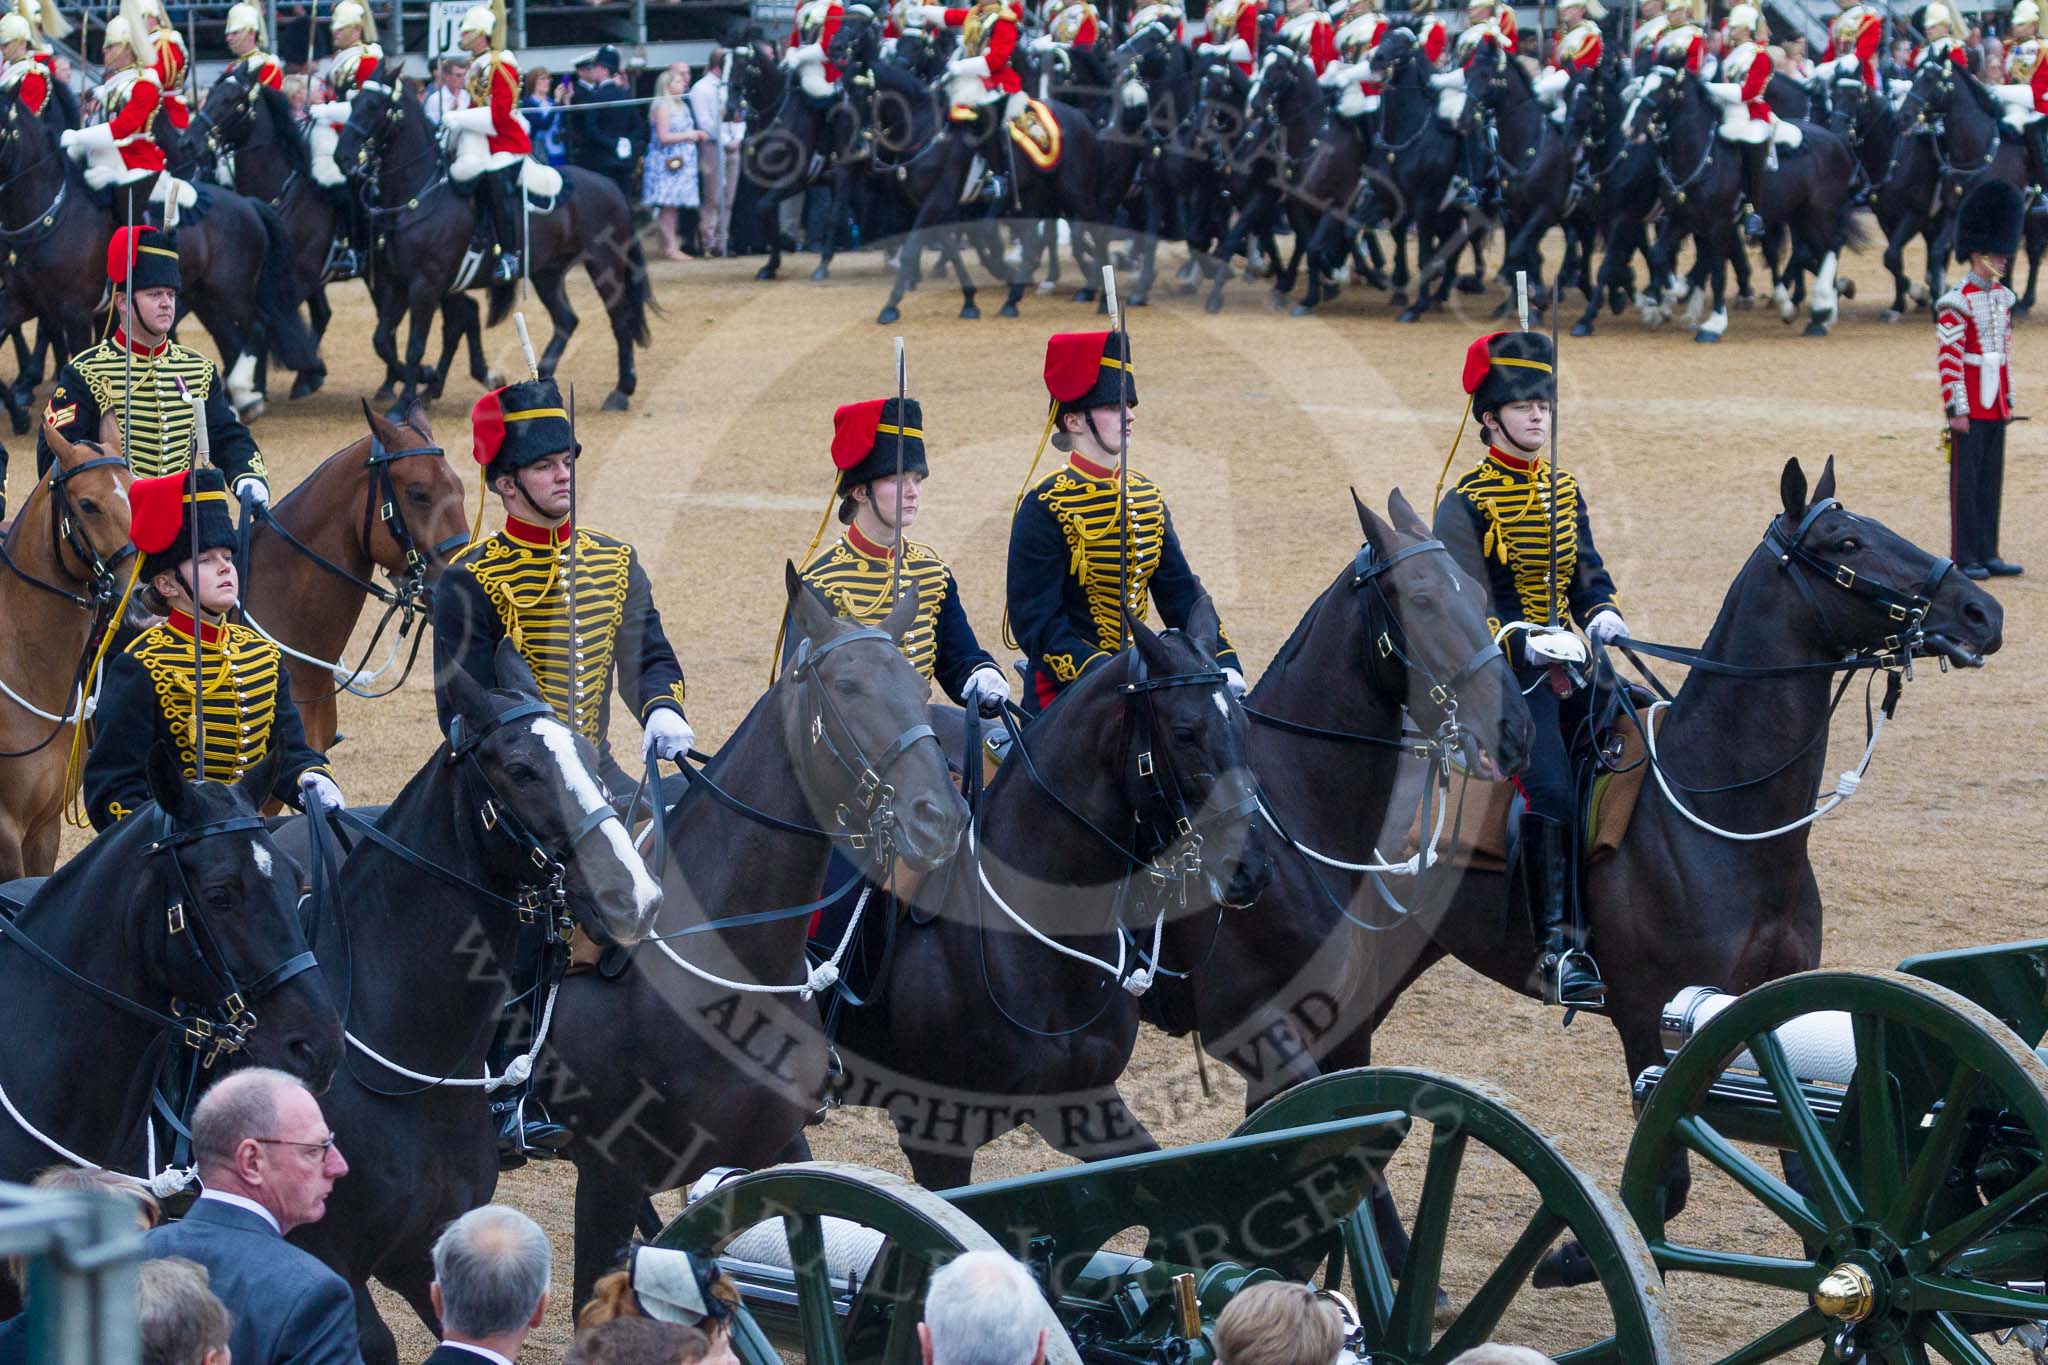 Trooping the Colour 2015. Image #588, 13 June 2015 11:57 Horse Guards Parade, London, UK